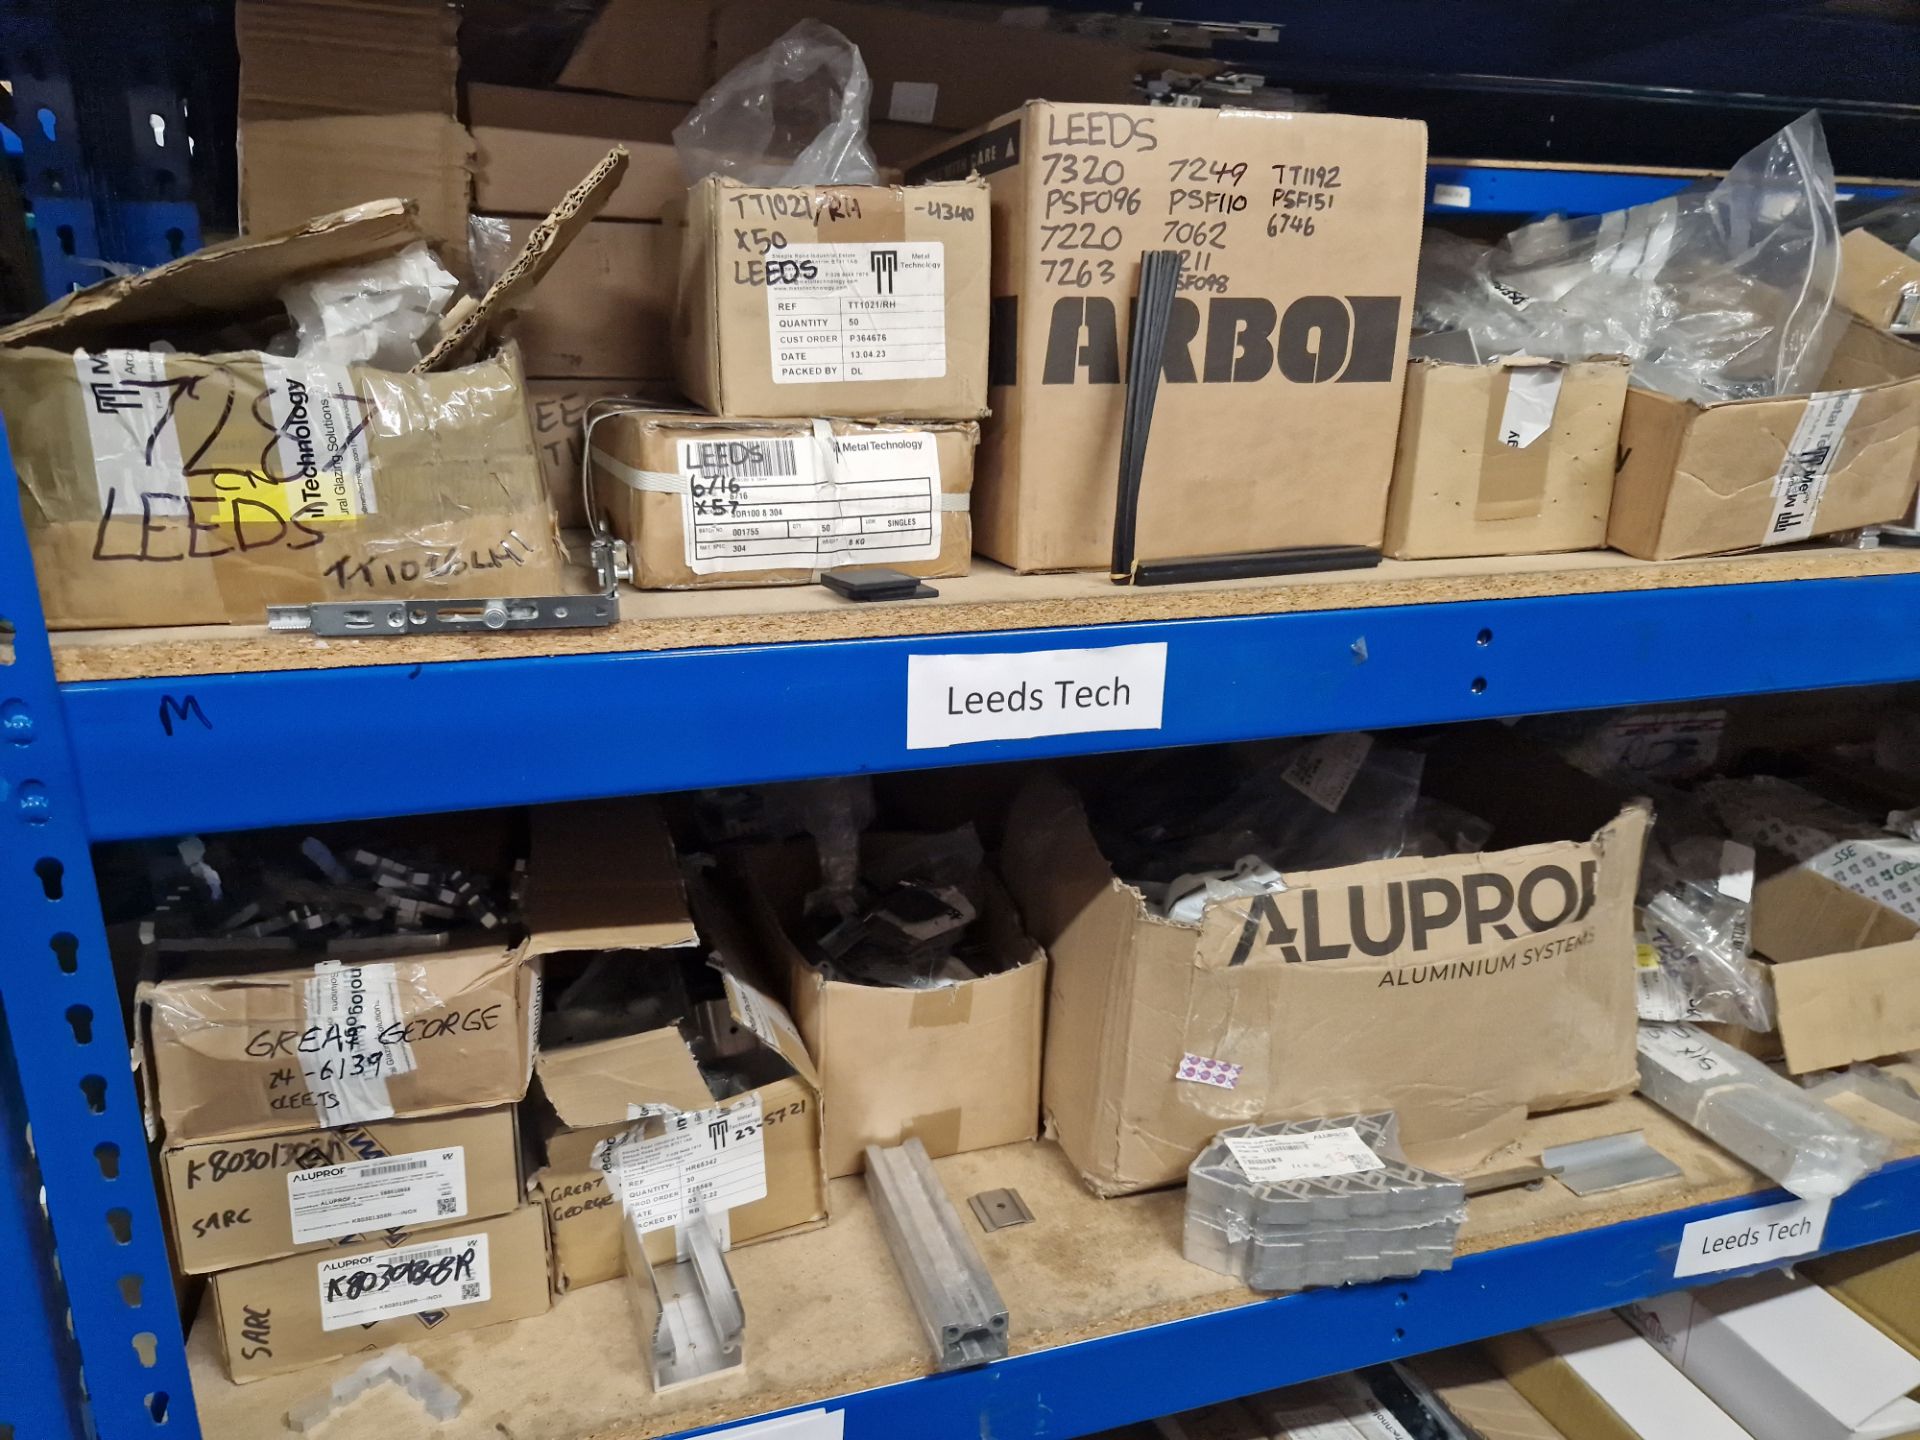 Contents to Four Bays of Shelving, including Rubber Gaskets, Aluminium Profile, End Caps, Screws, - Image 6 of 13